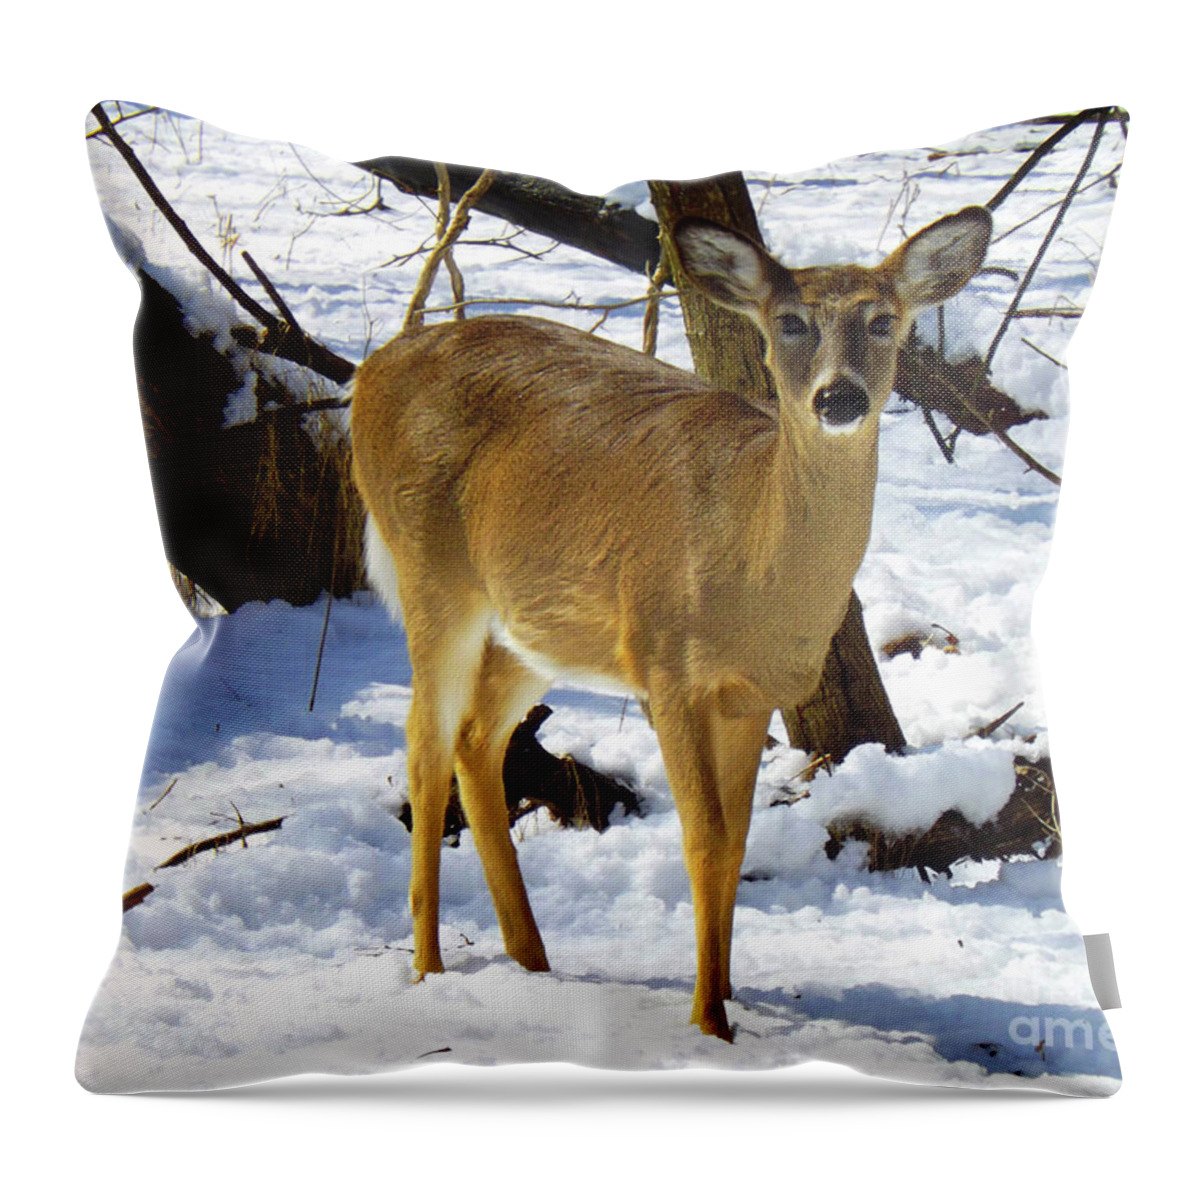 New Throw Pillow featuring the photograph Snow Angel by Robyn King